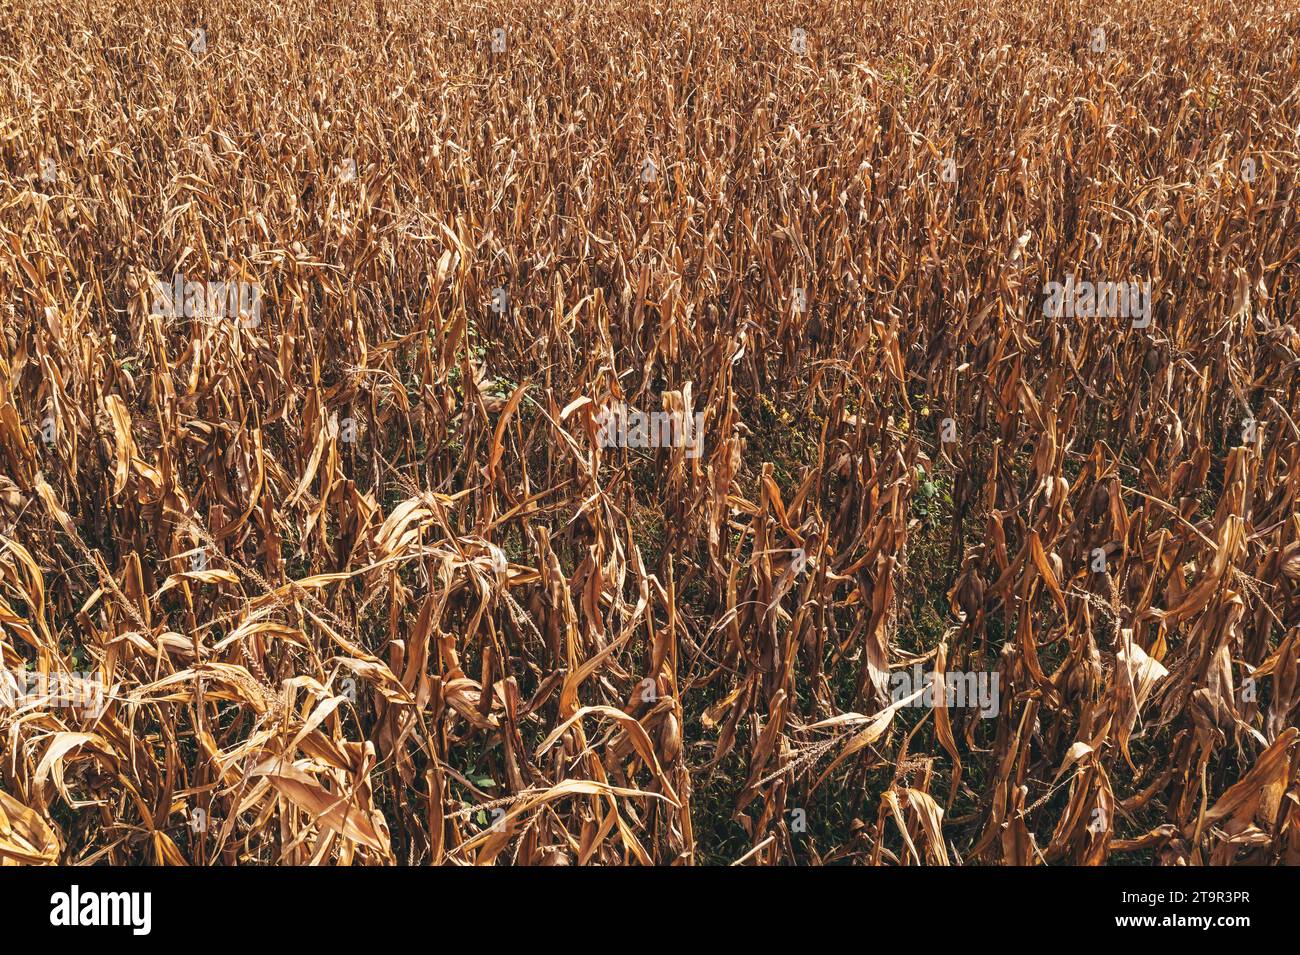 Poor quality corn field in bad condition after severe summer drought season, high angle view Stock Photo